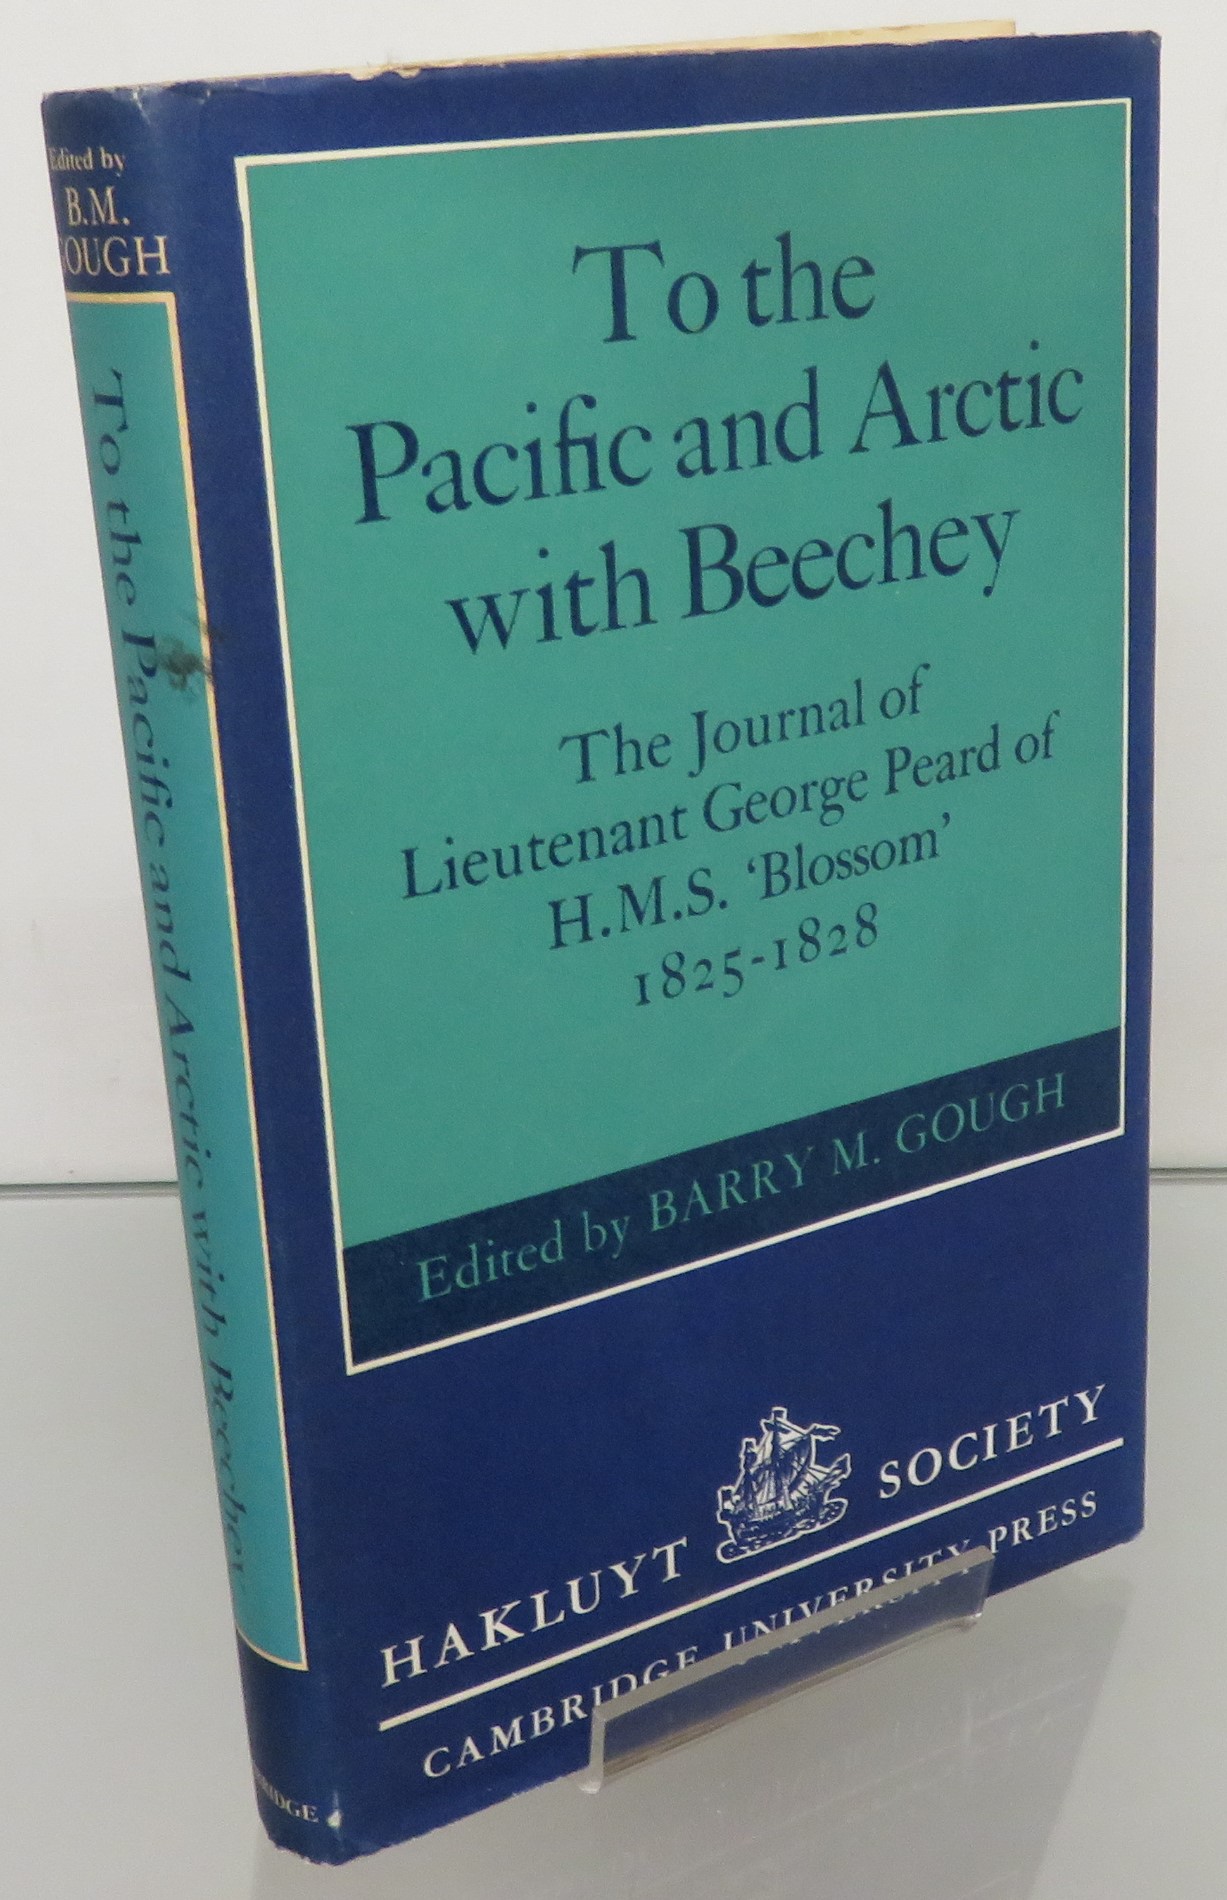 To the Pacific and Arctic with Beechey: The Journal of Lieutenant Goerge Peard of H.M.S. 'Blossom' 1825-1828